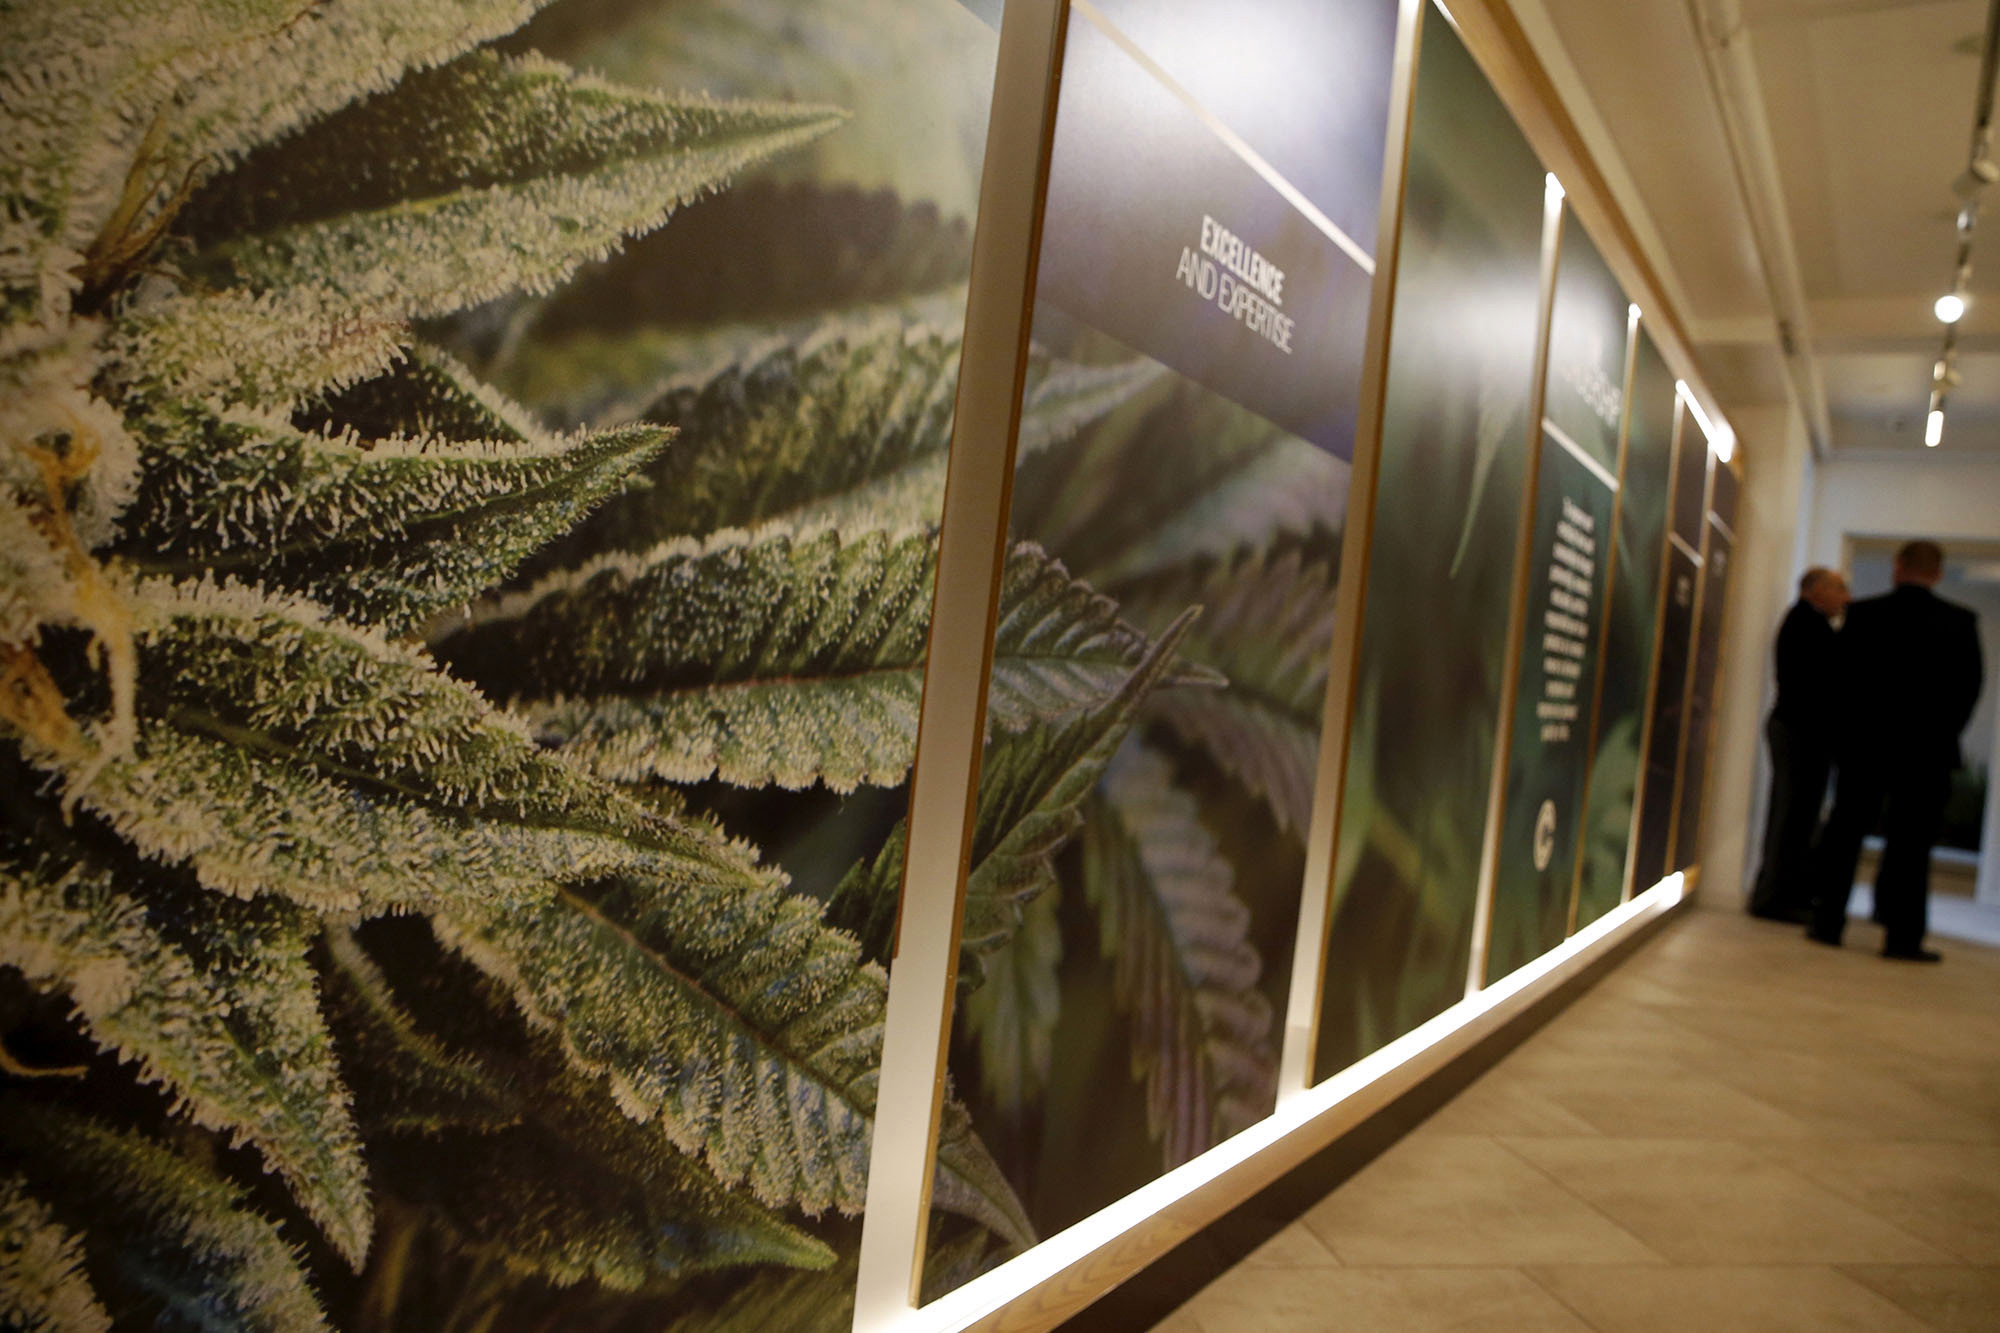 New York's first medical marijuana dispensaries are opening their doors on Thursday, as the state launches one of the most conservative programs of its kind in the United States.